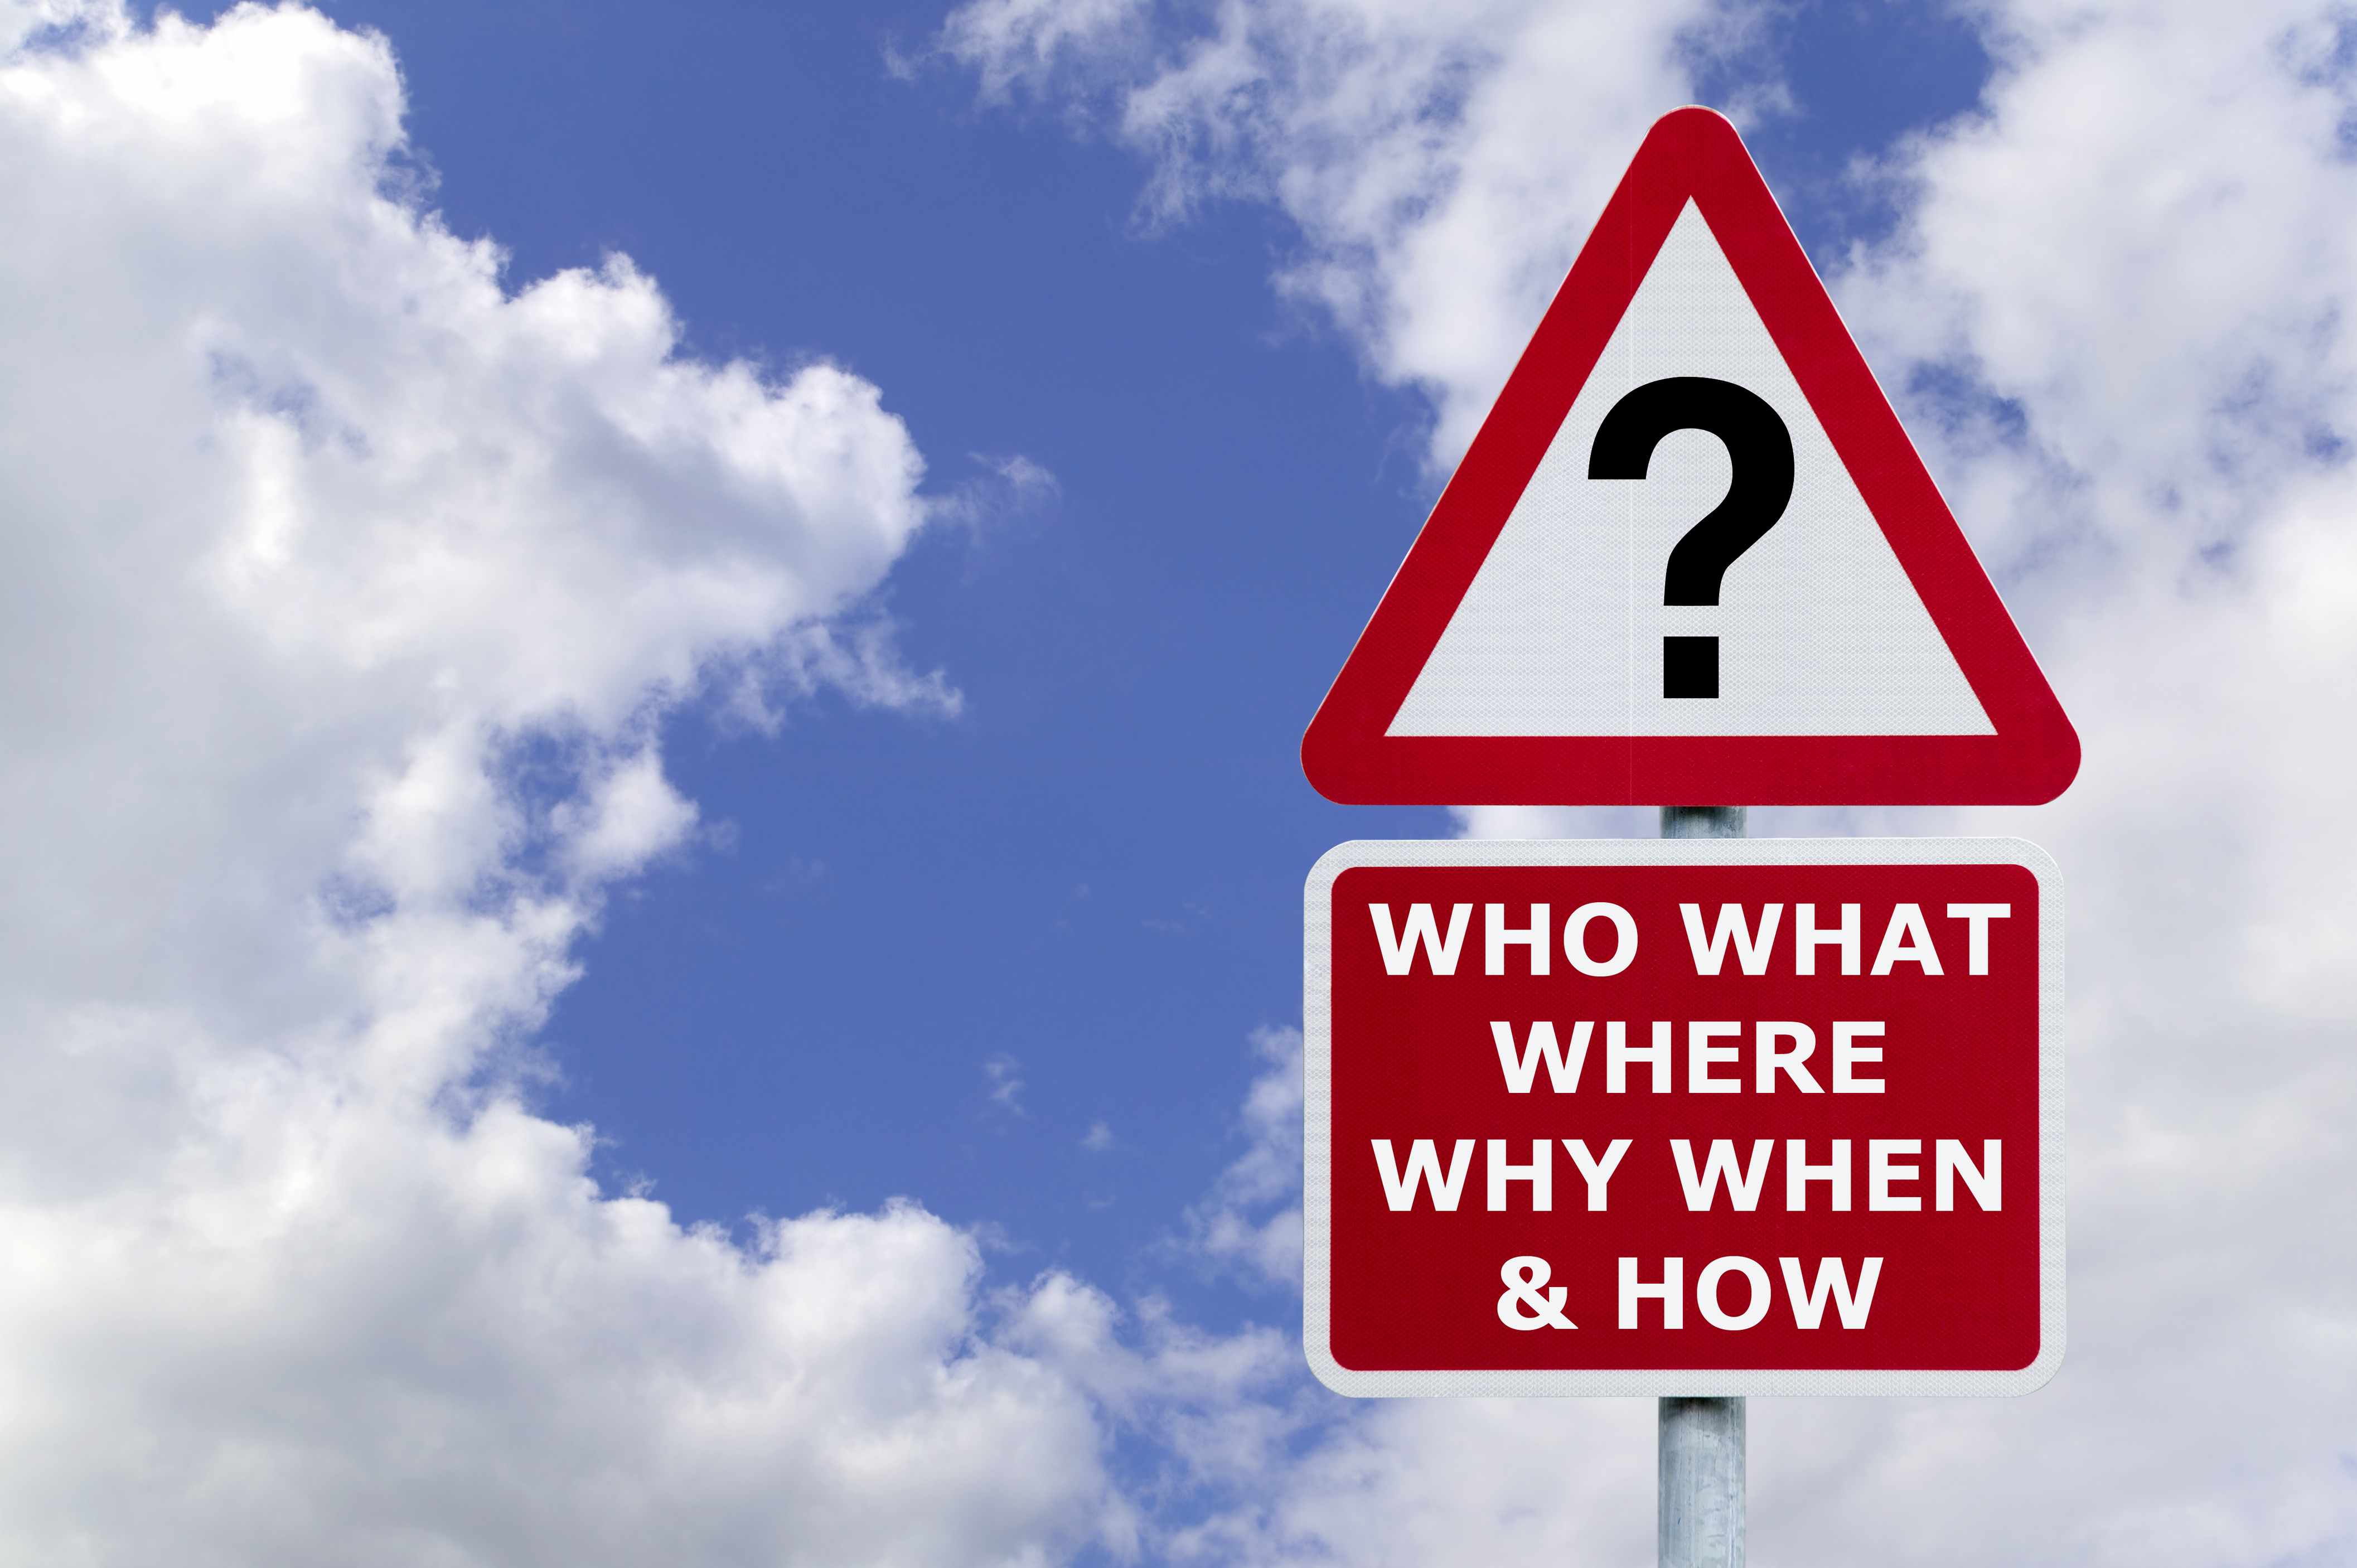 What questions should an SMB entrepreneur keep asking themselves